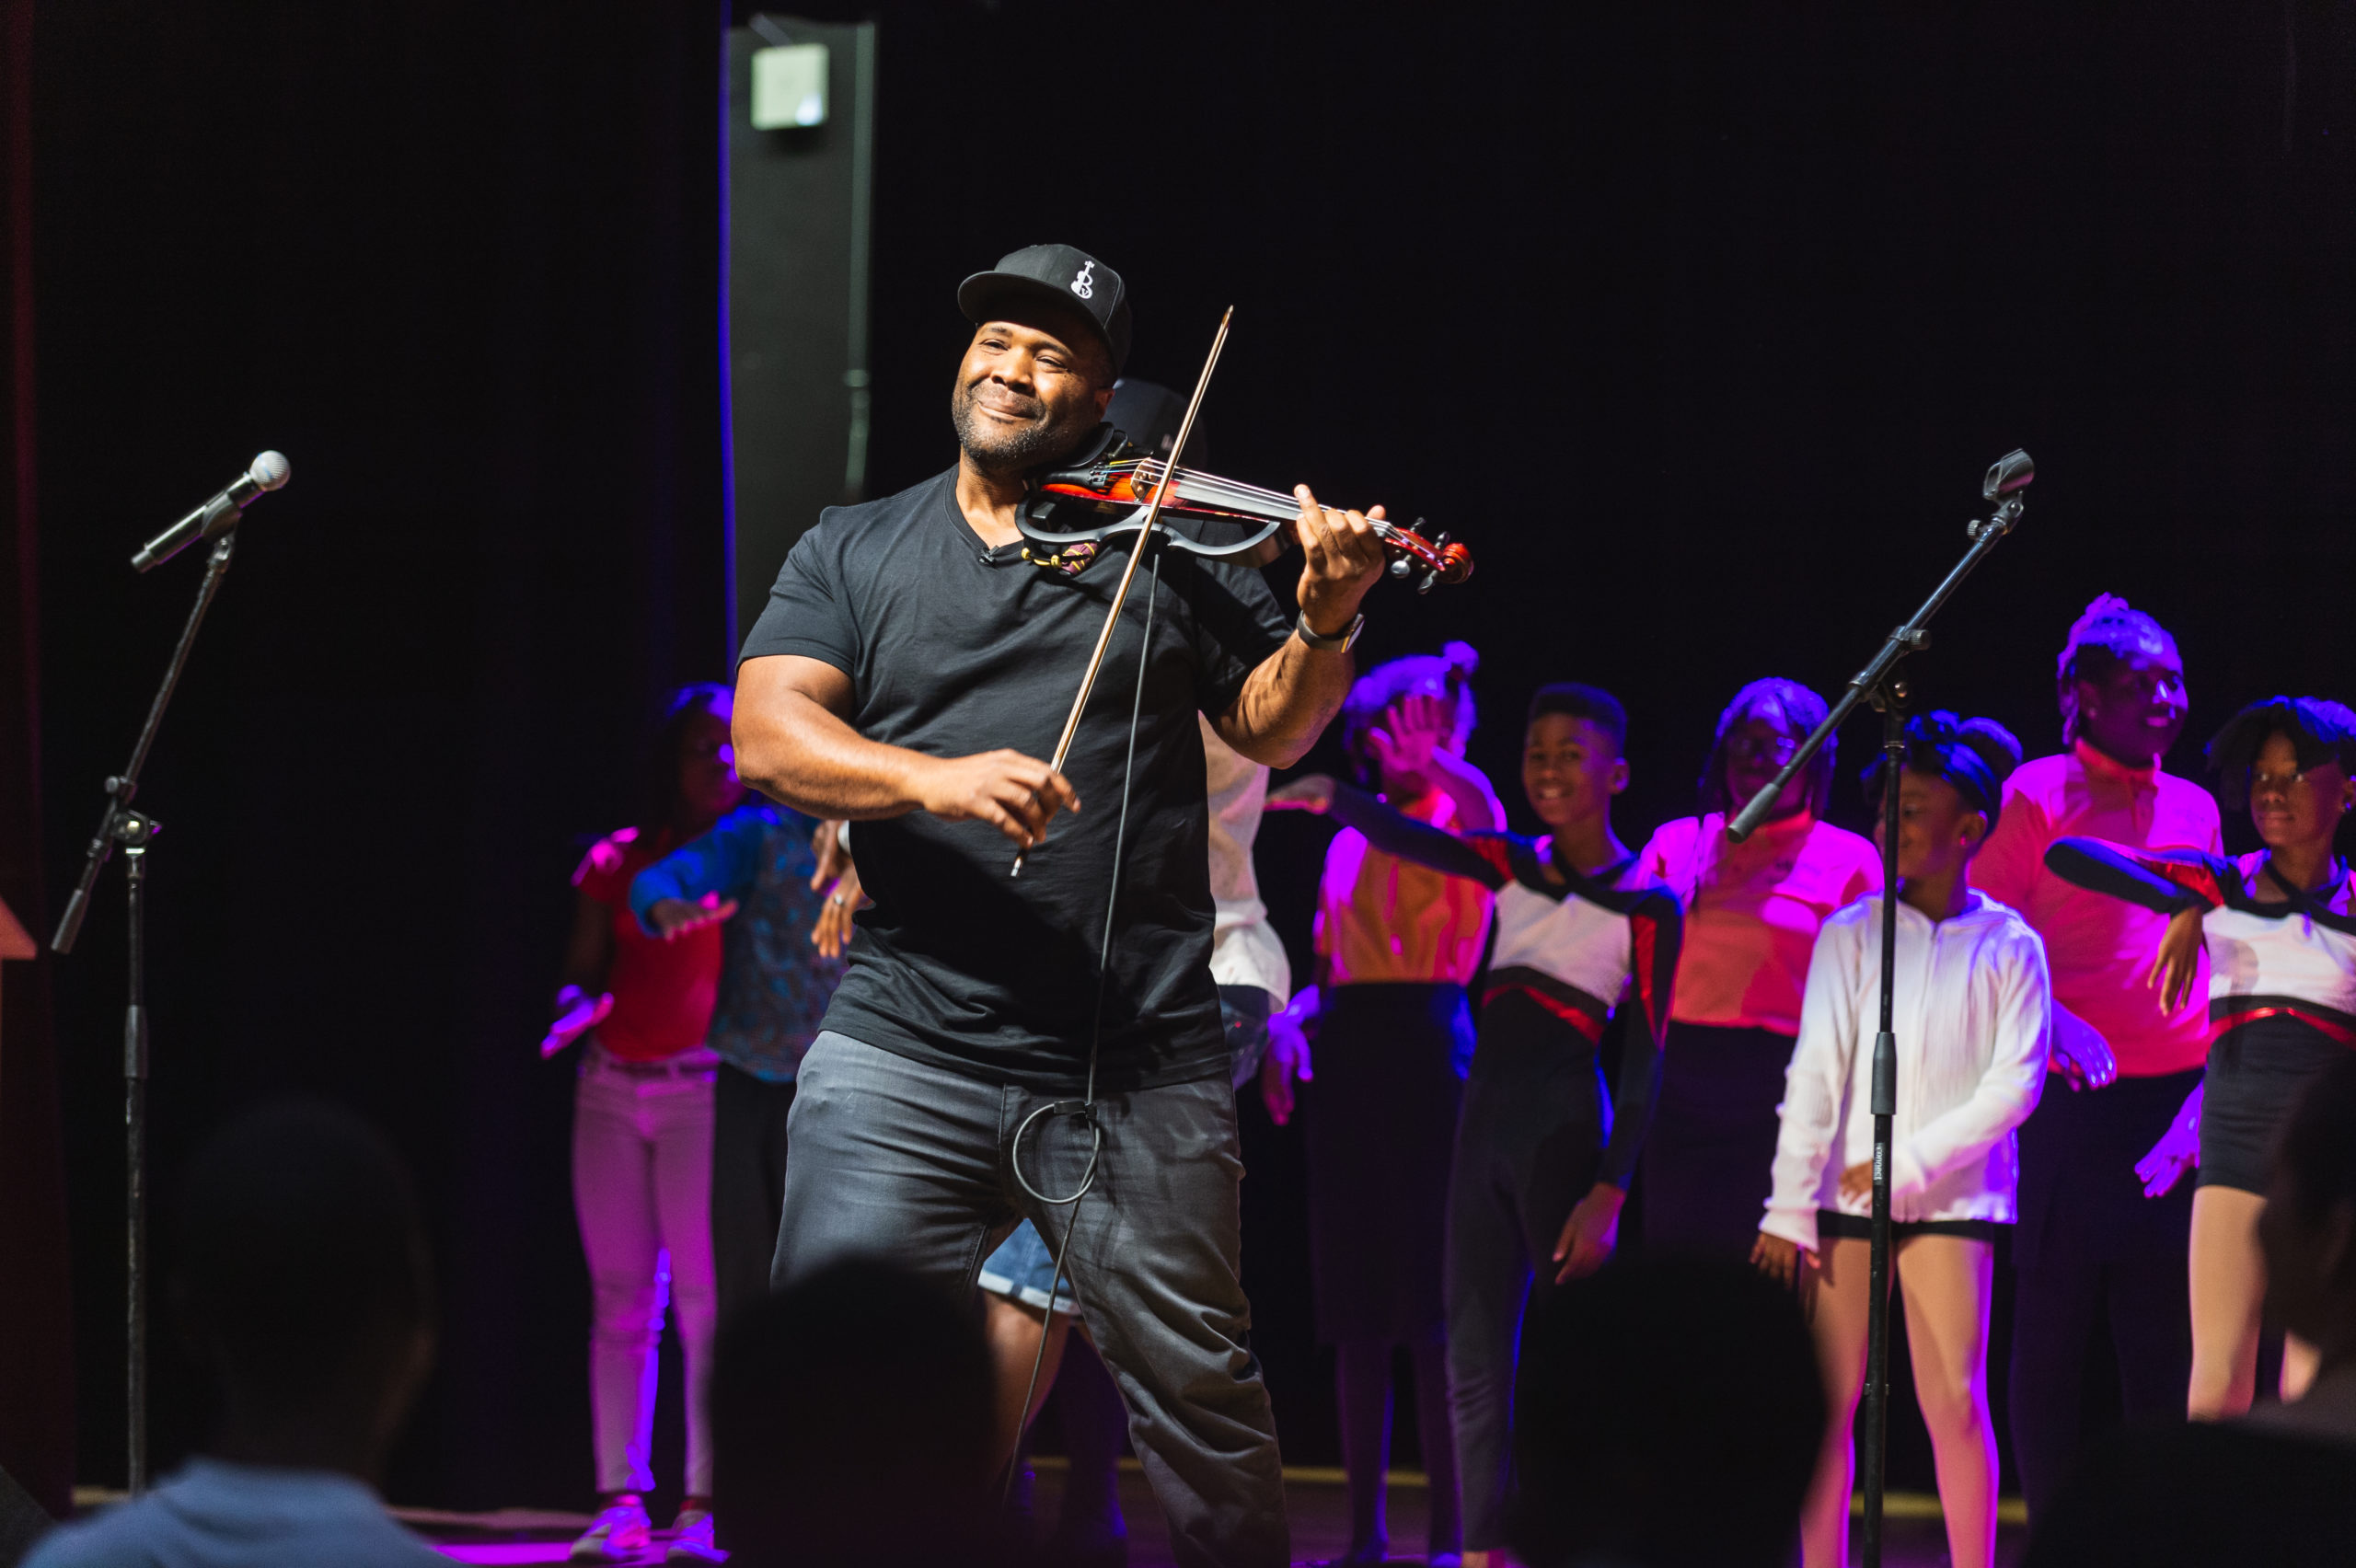 The Kennedy Center African American man wearing a black cap playing a violin with an audience of children behind him